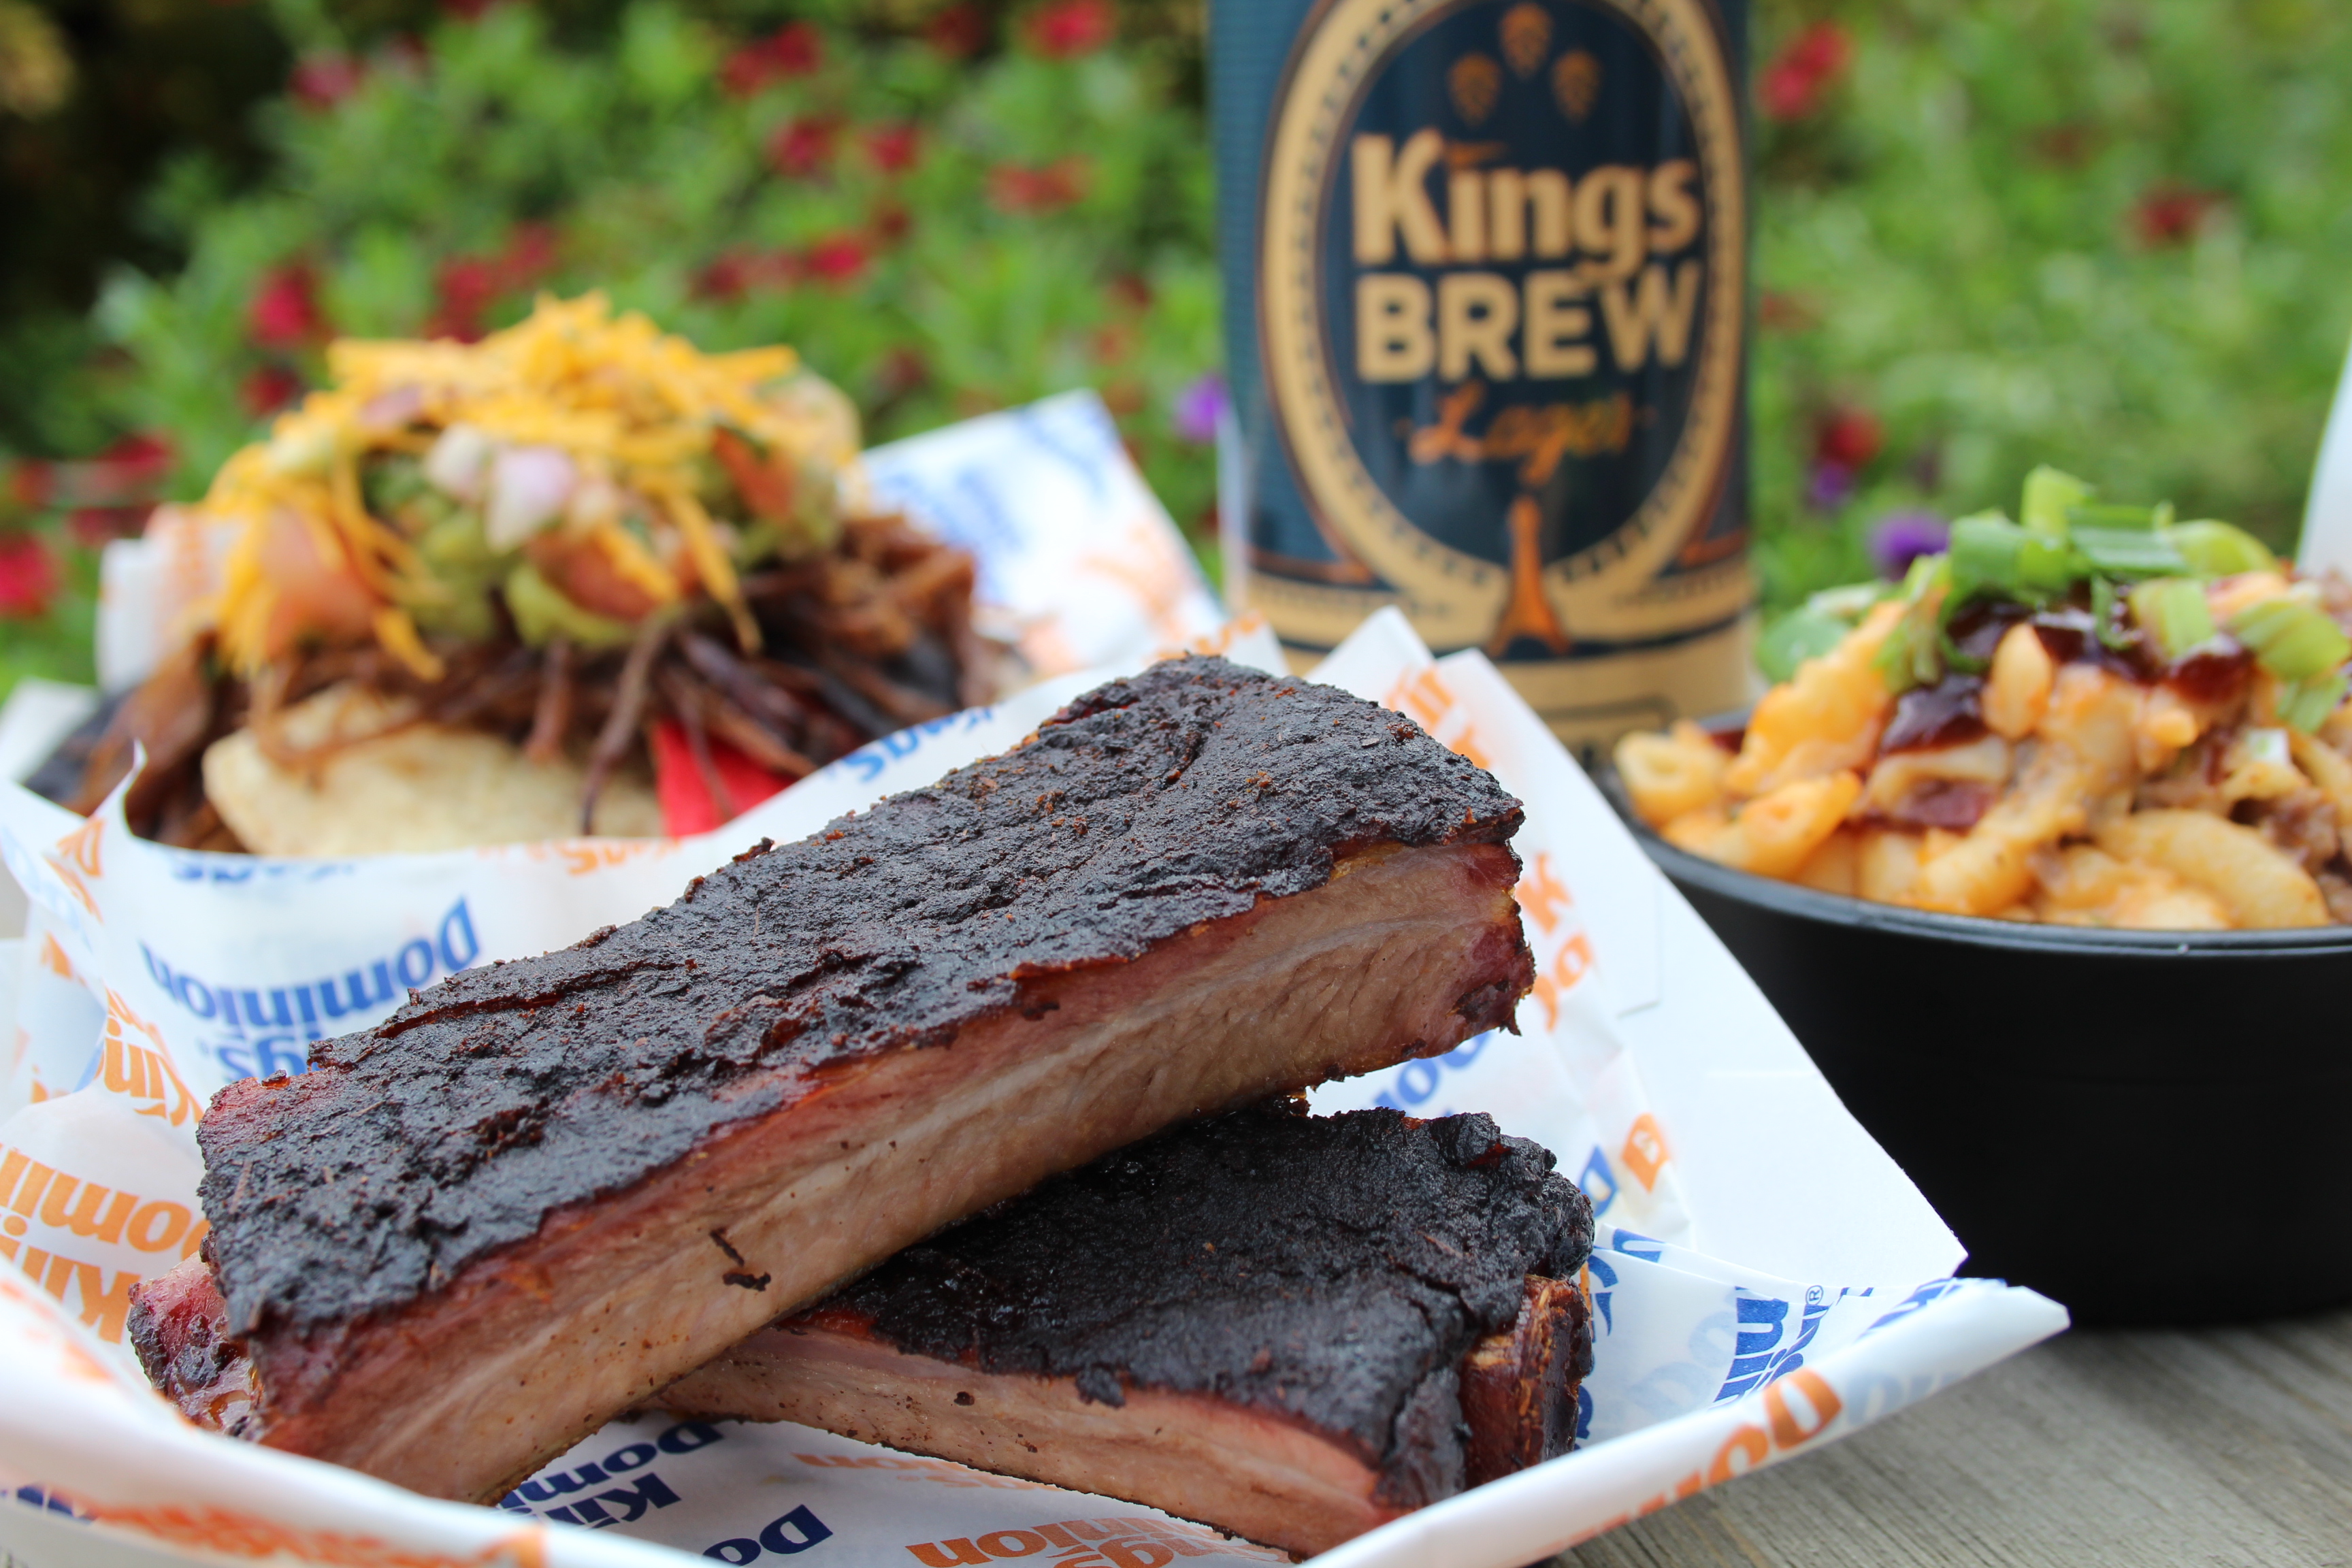 KINGS DOMINION’S ANNUAL BBQ & BREW FEST RETURNS THIS WEEKEND!